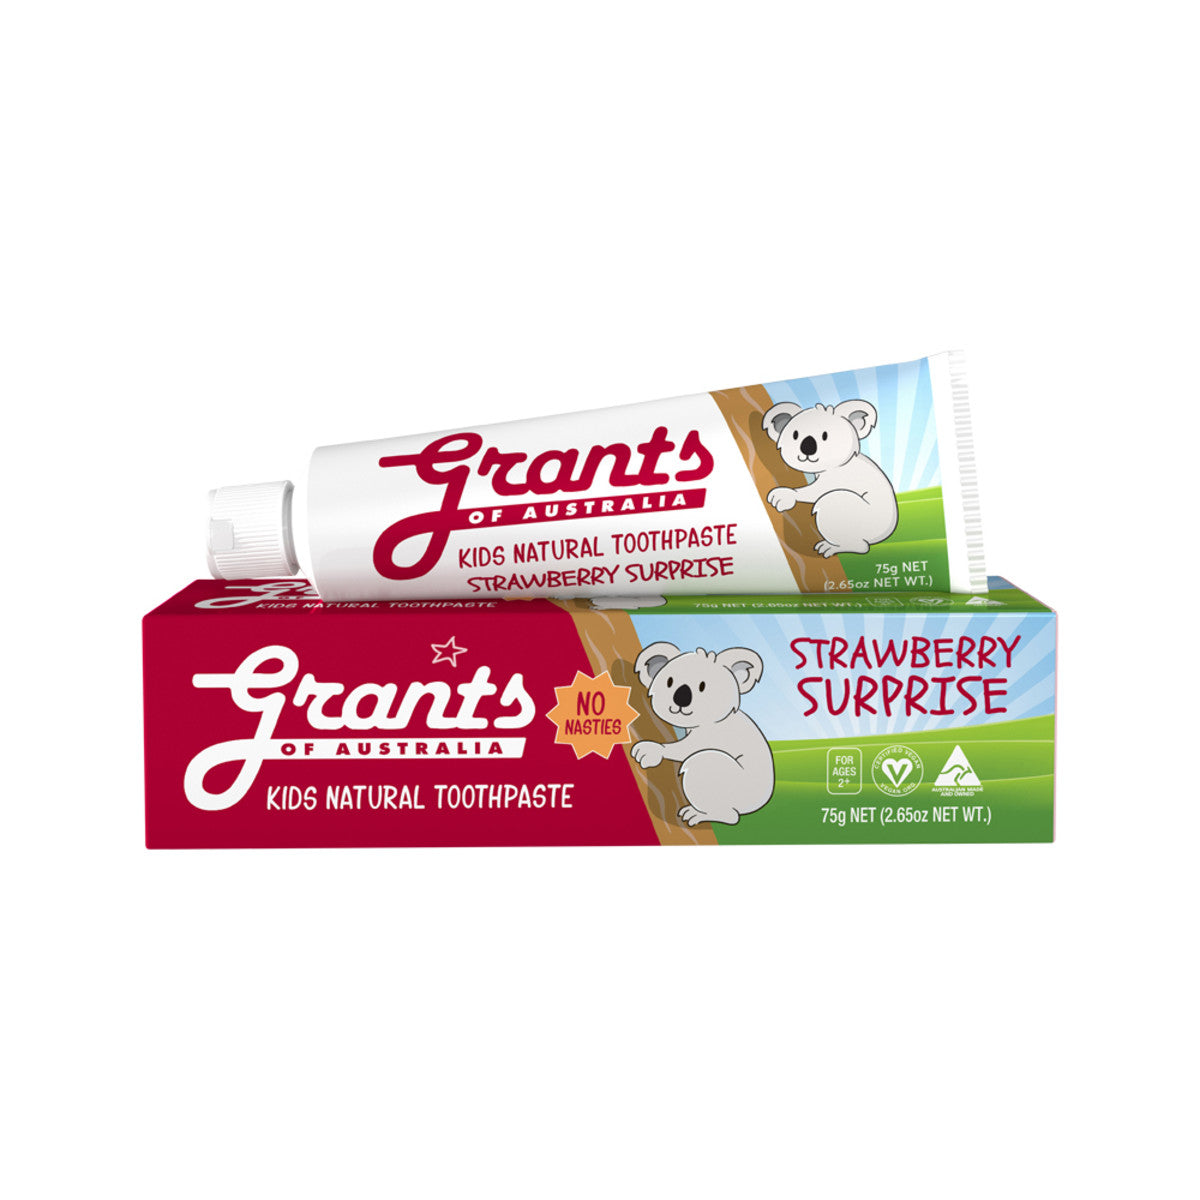 Grants - Natural Toothpaste (Kids Strawberry Surprise)